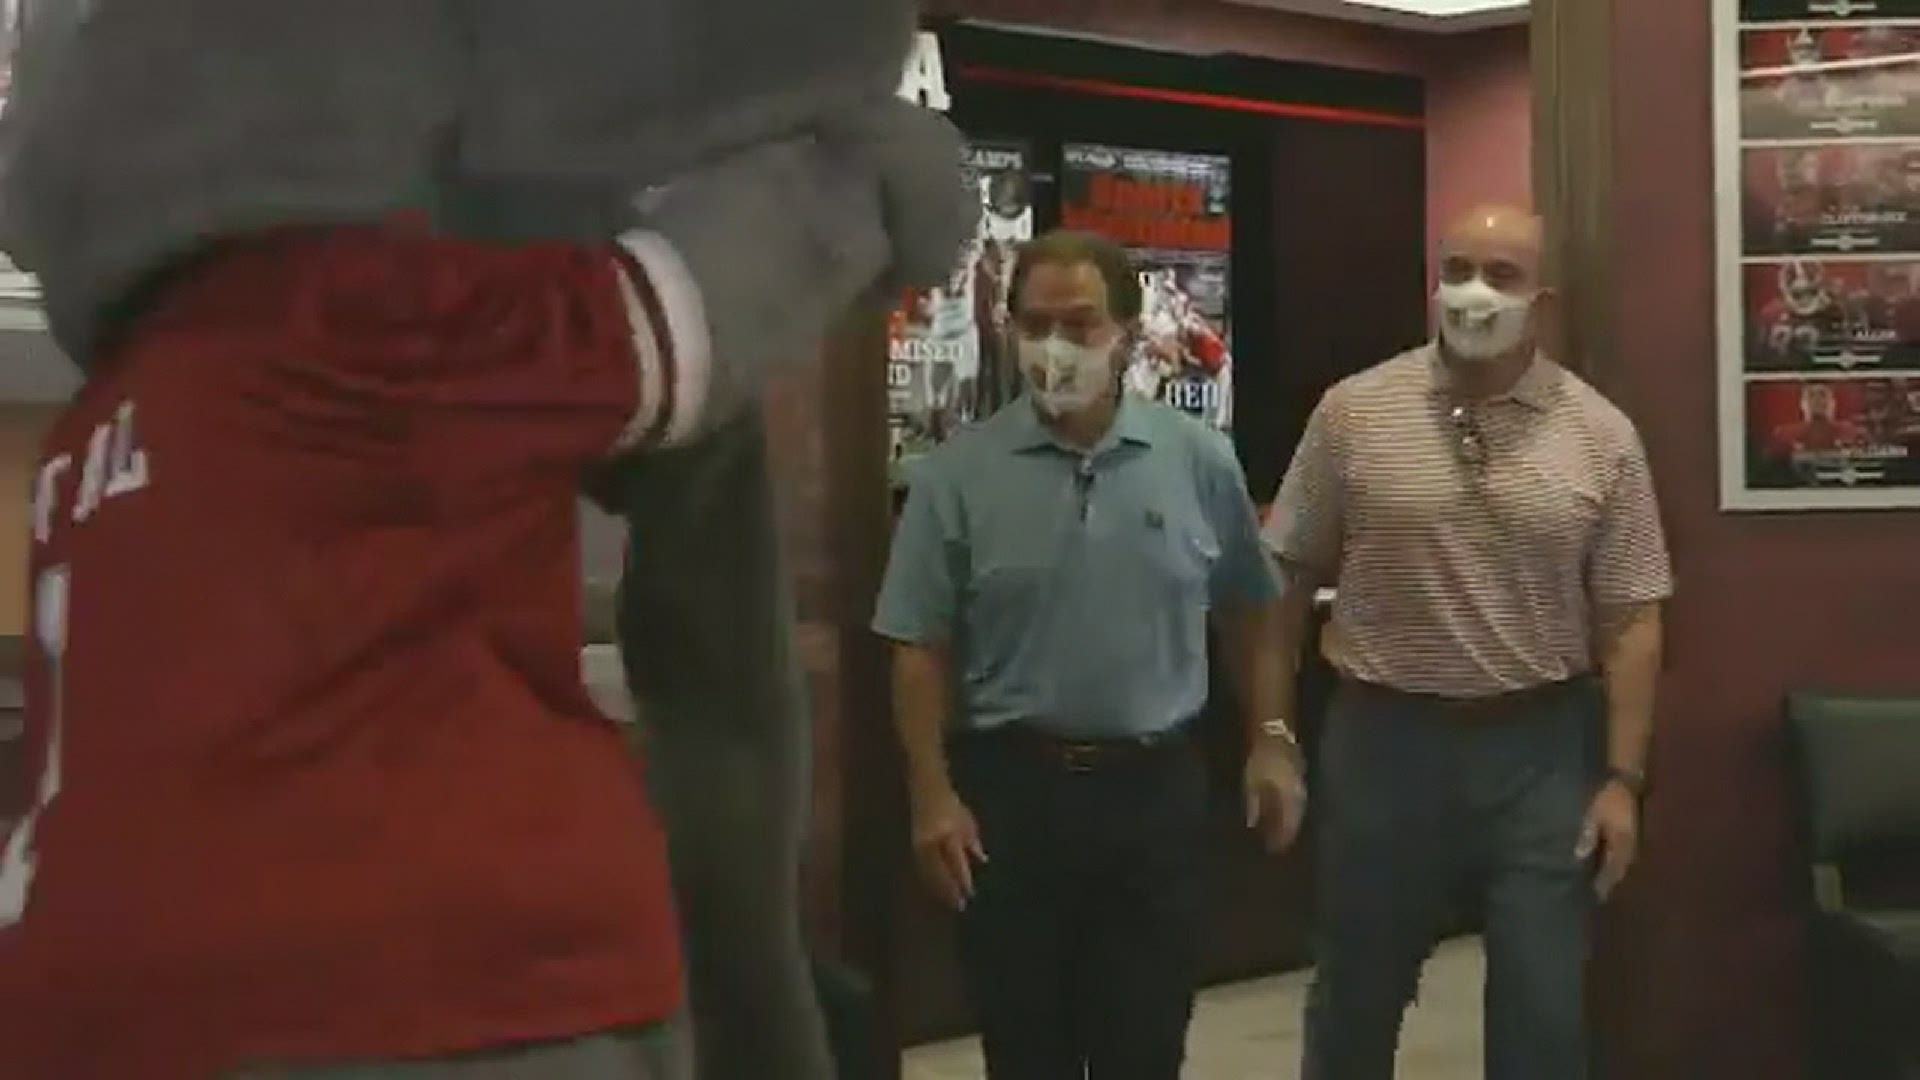 Alabama football head coach Nick Saban is the star of a PSA video about wearing masks and social distancing posted by the Crimson Tide football's Twitter account.